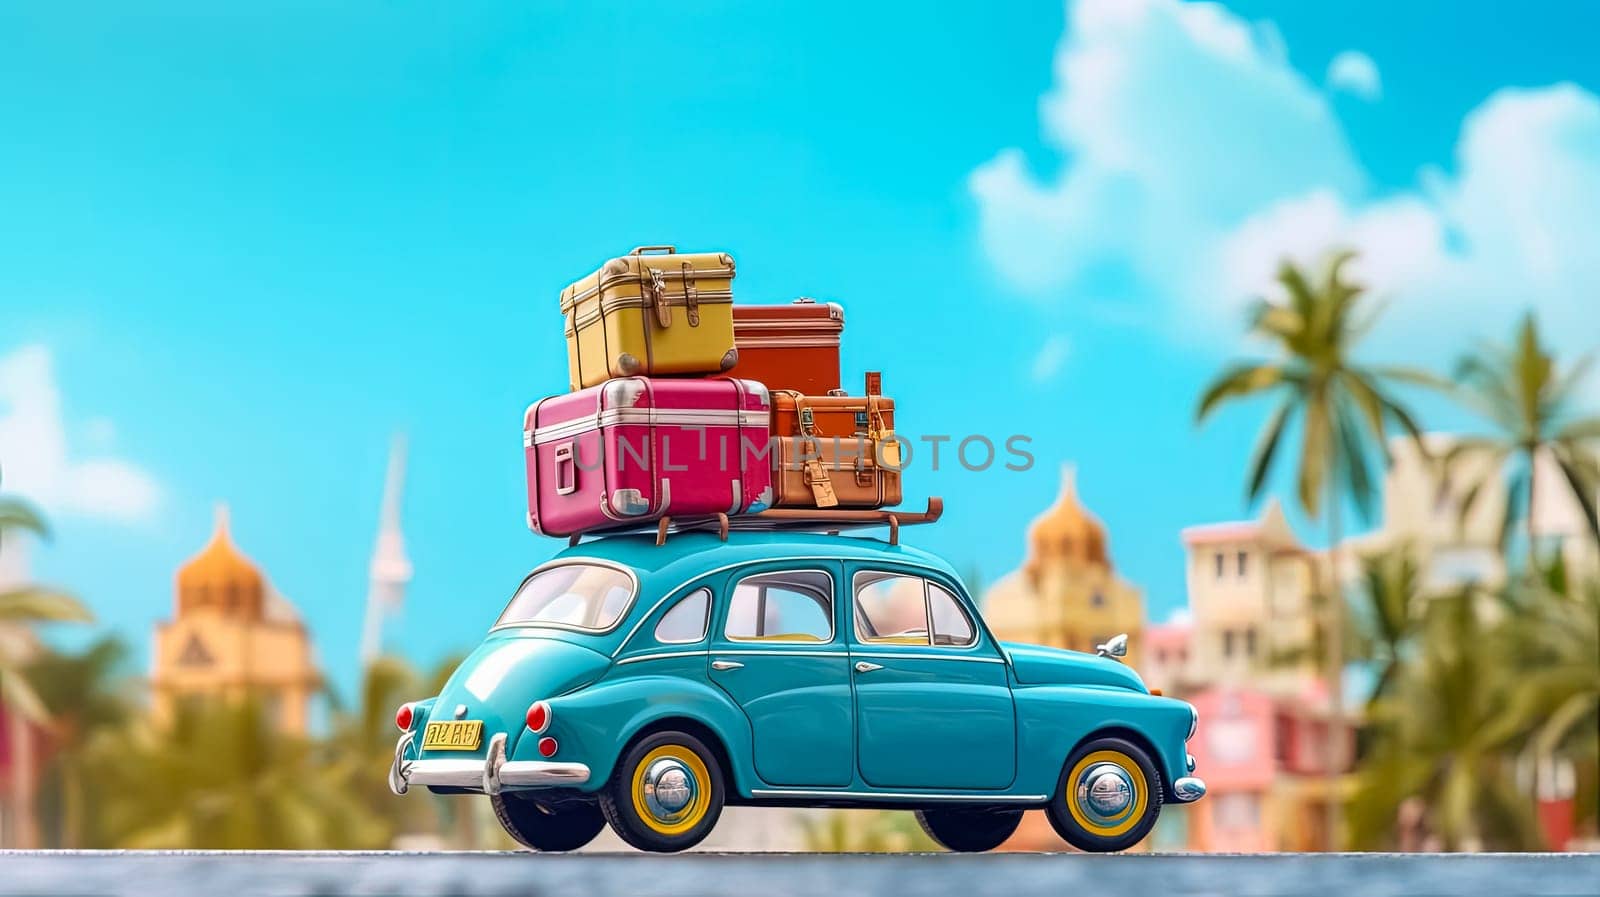 A compact retro car, rooftop loaded with luggage and beach essentials by Alla_Morozova93